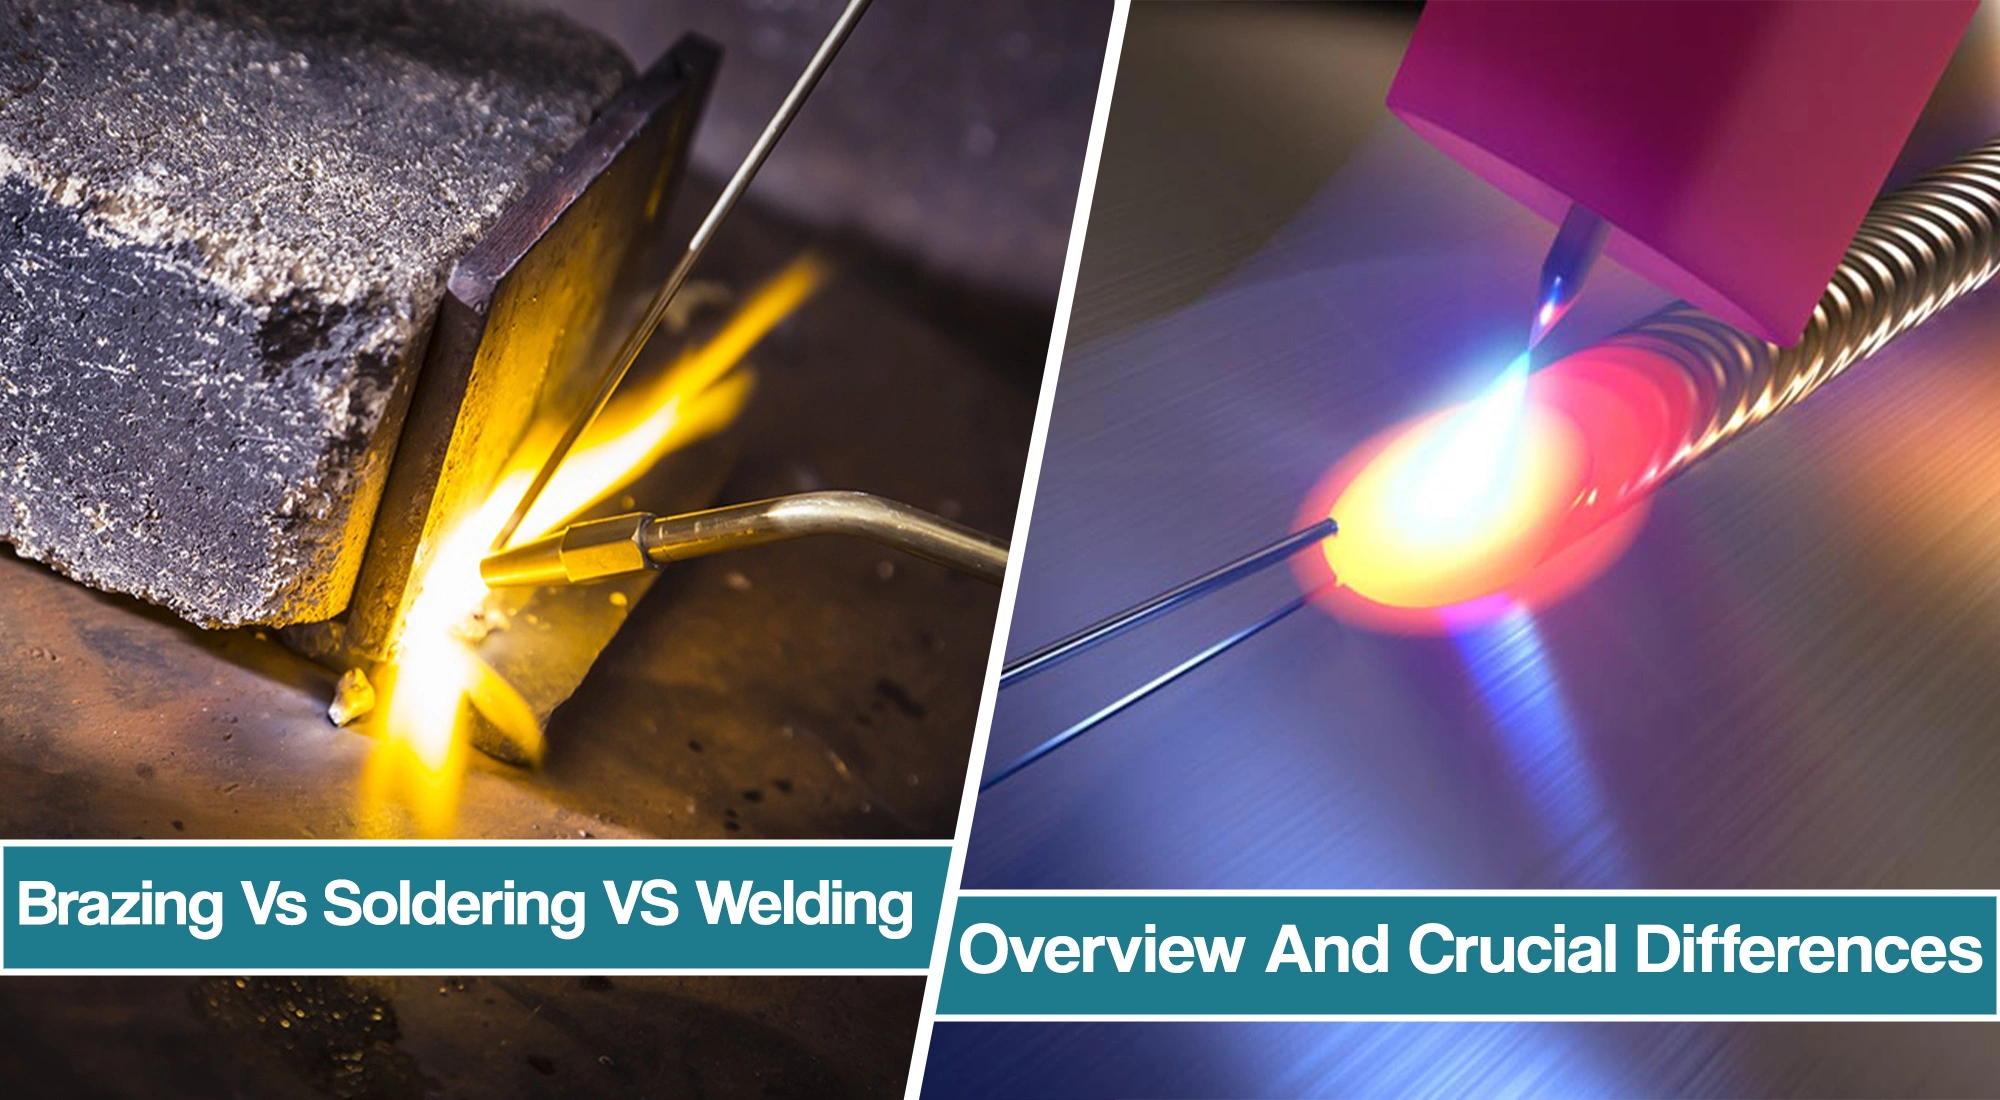 Brazing Vs Soldering Vs Welding – Overview, Crucial Differences, and Head-to-Head Comparison